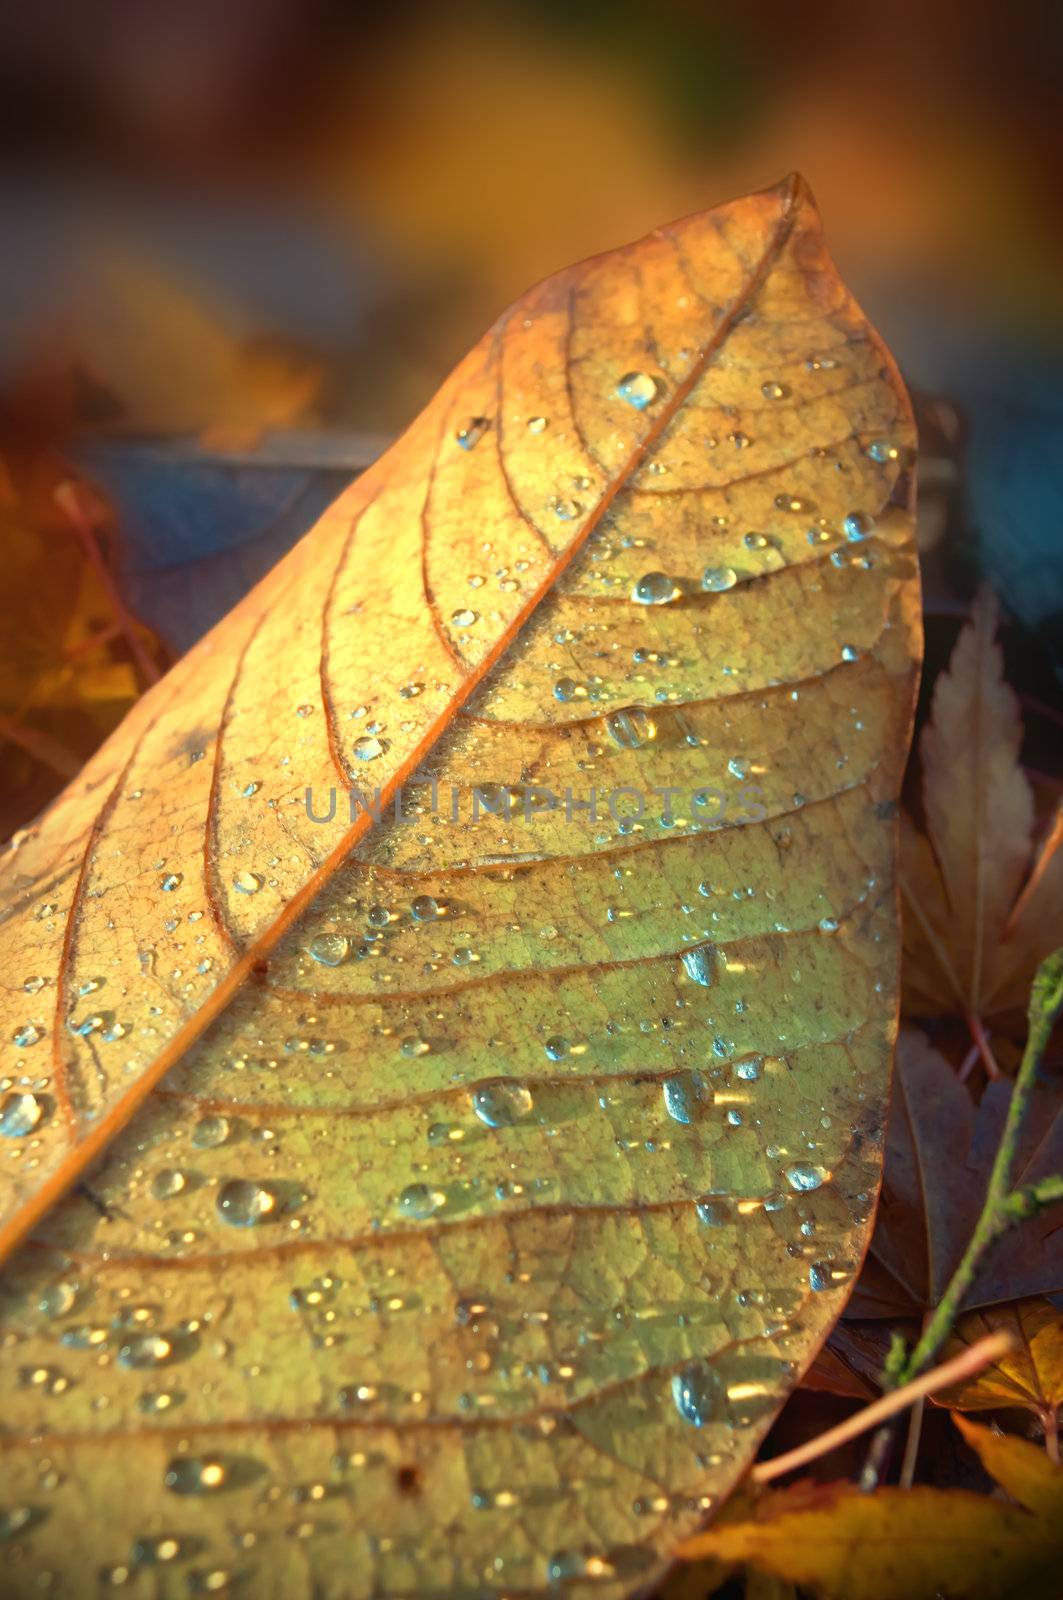 Close up on a fallen autumn leaf with droplets of thawed frost. Blurred leaf background.